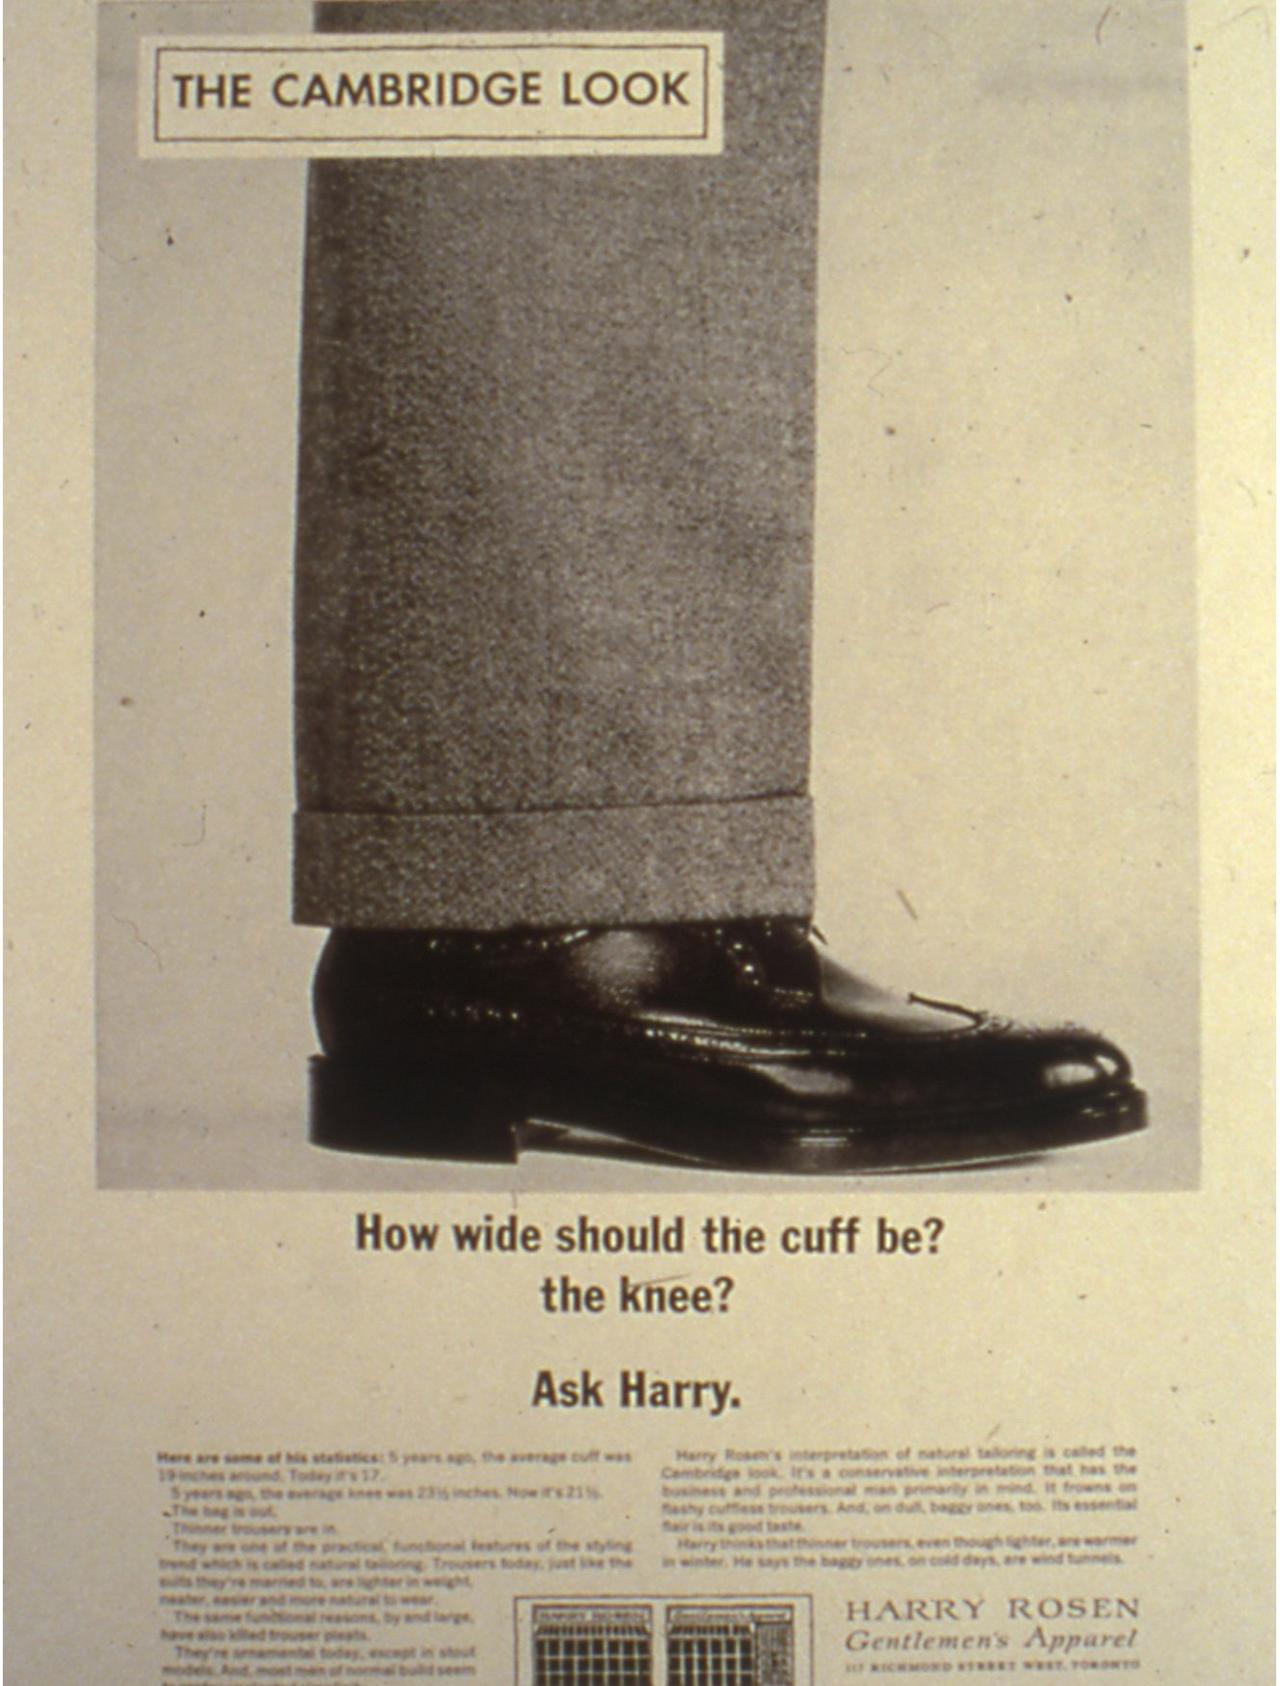 The iconic Ask Harry advertising campaign.